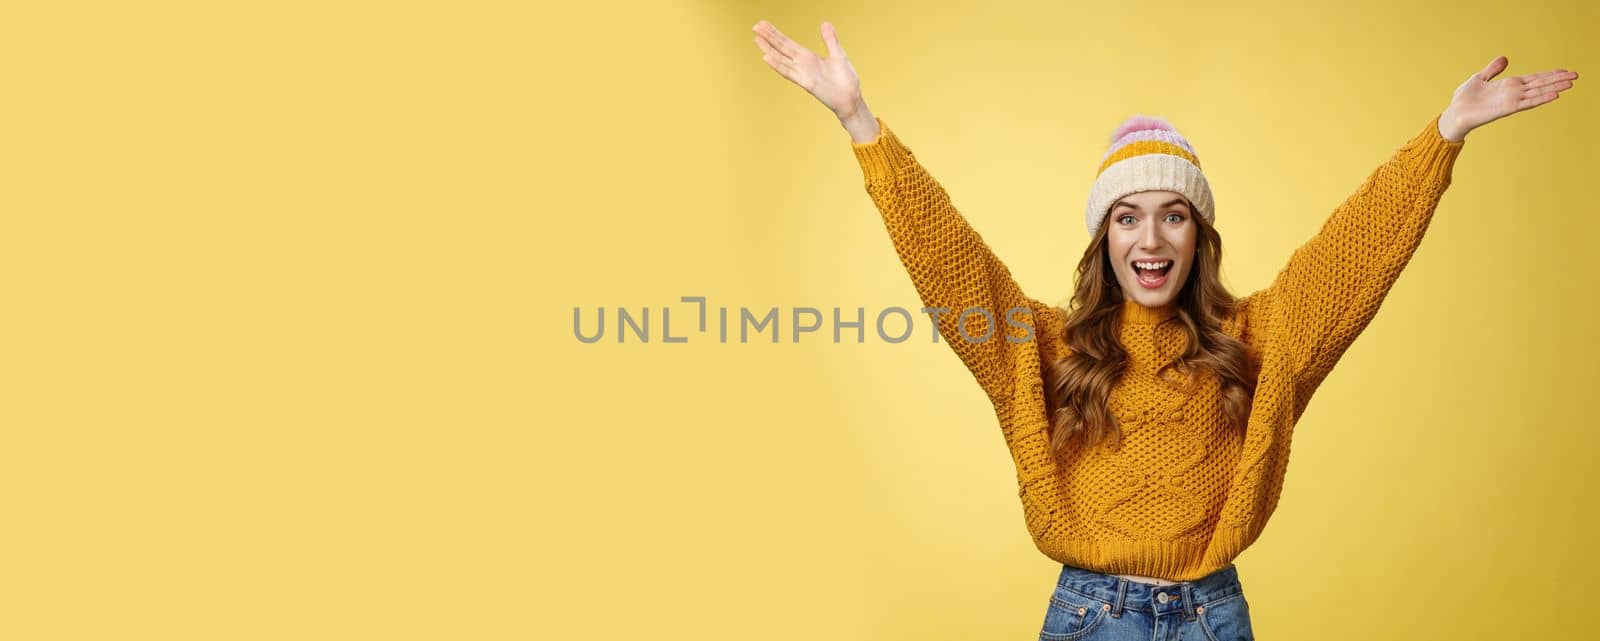 Hooray fantastic news. Portrait excited happy pleased charming young girl raising hands thrilled smiling broadly pleasant surprise meet best friend, celebrating achievement happily. Copy space